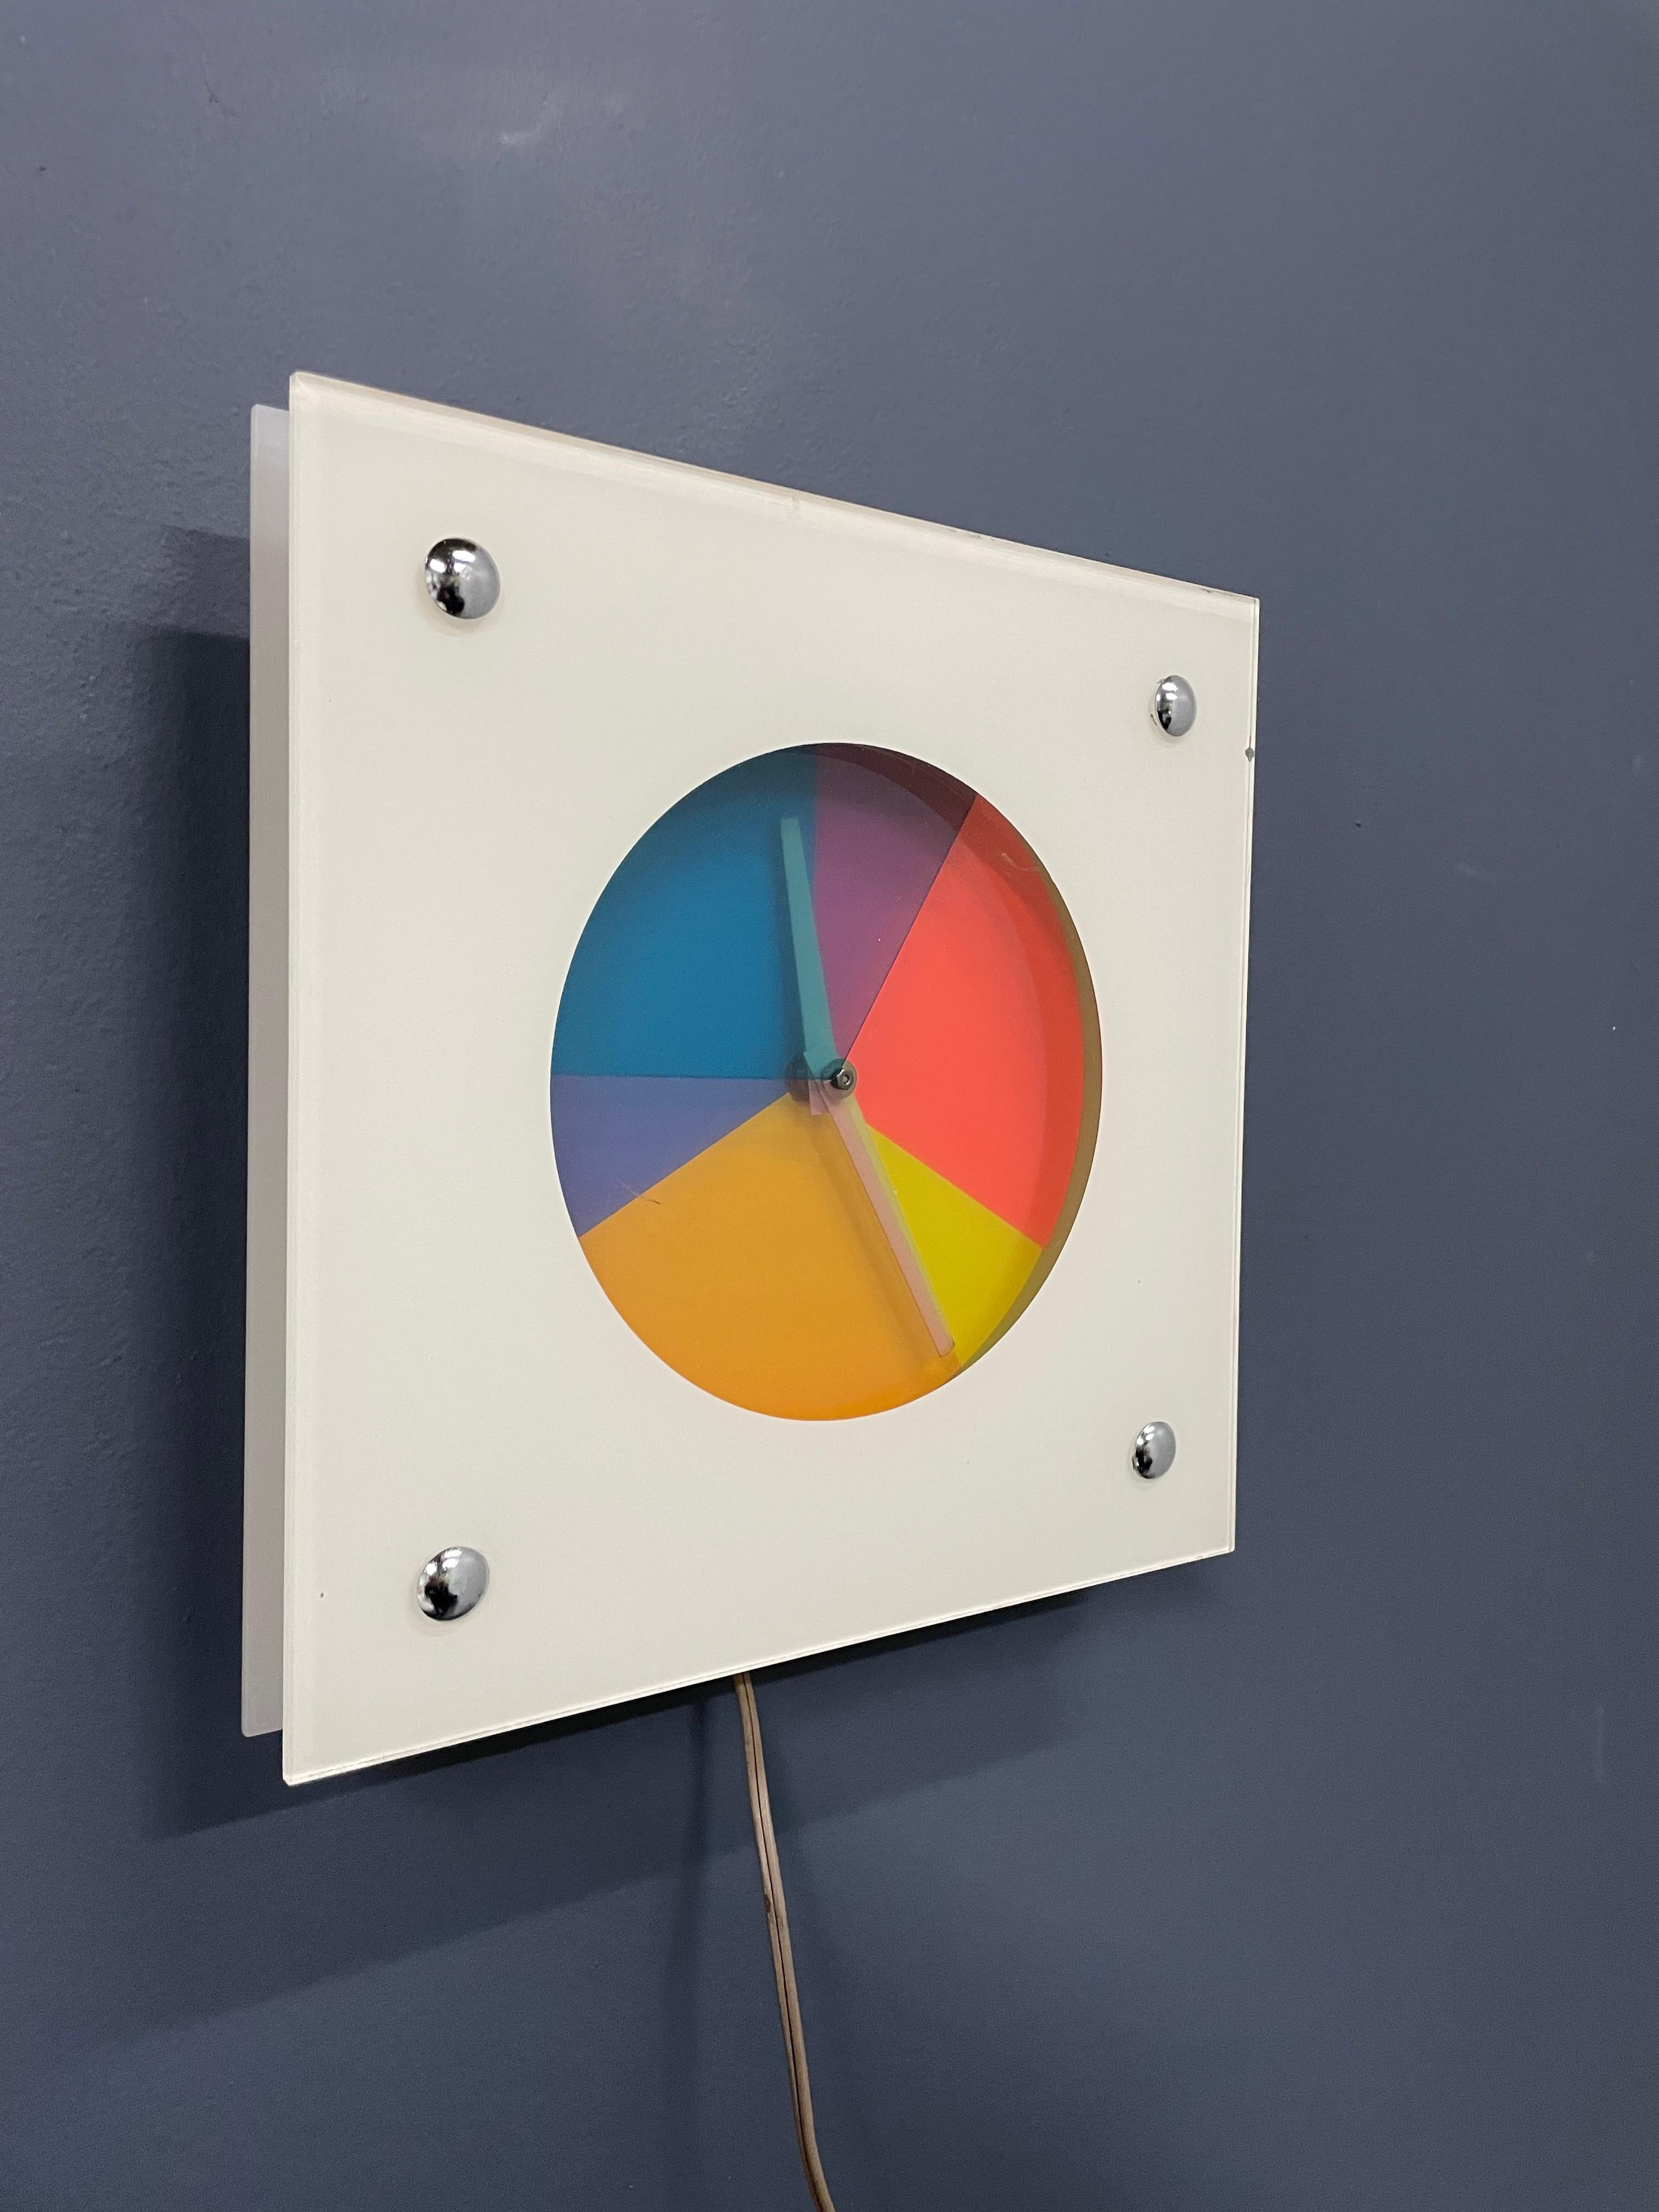 Super rare clock manufactured by Peam of New York, this clock in a glass frame has rotating pieces of colored lucite that rotate to make a kaleidoscope movement, see video.